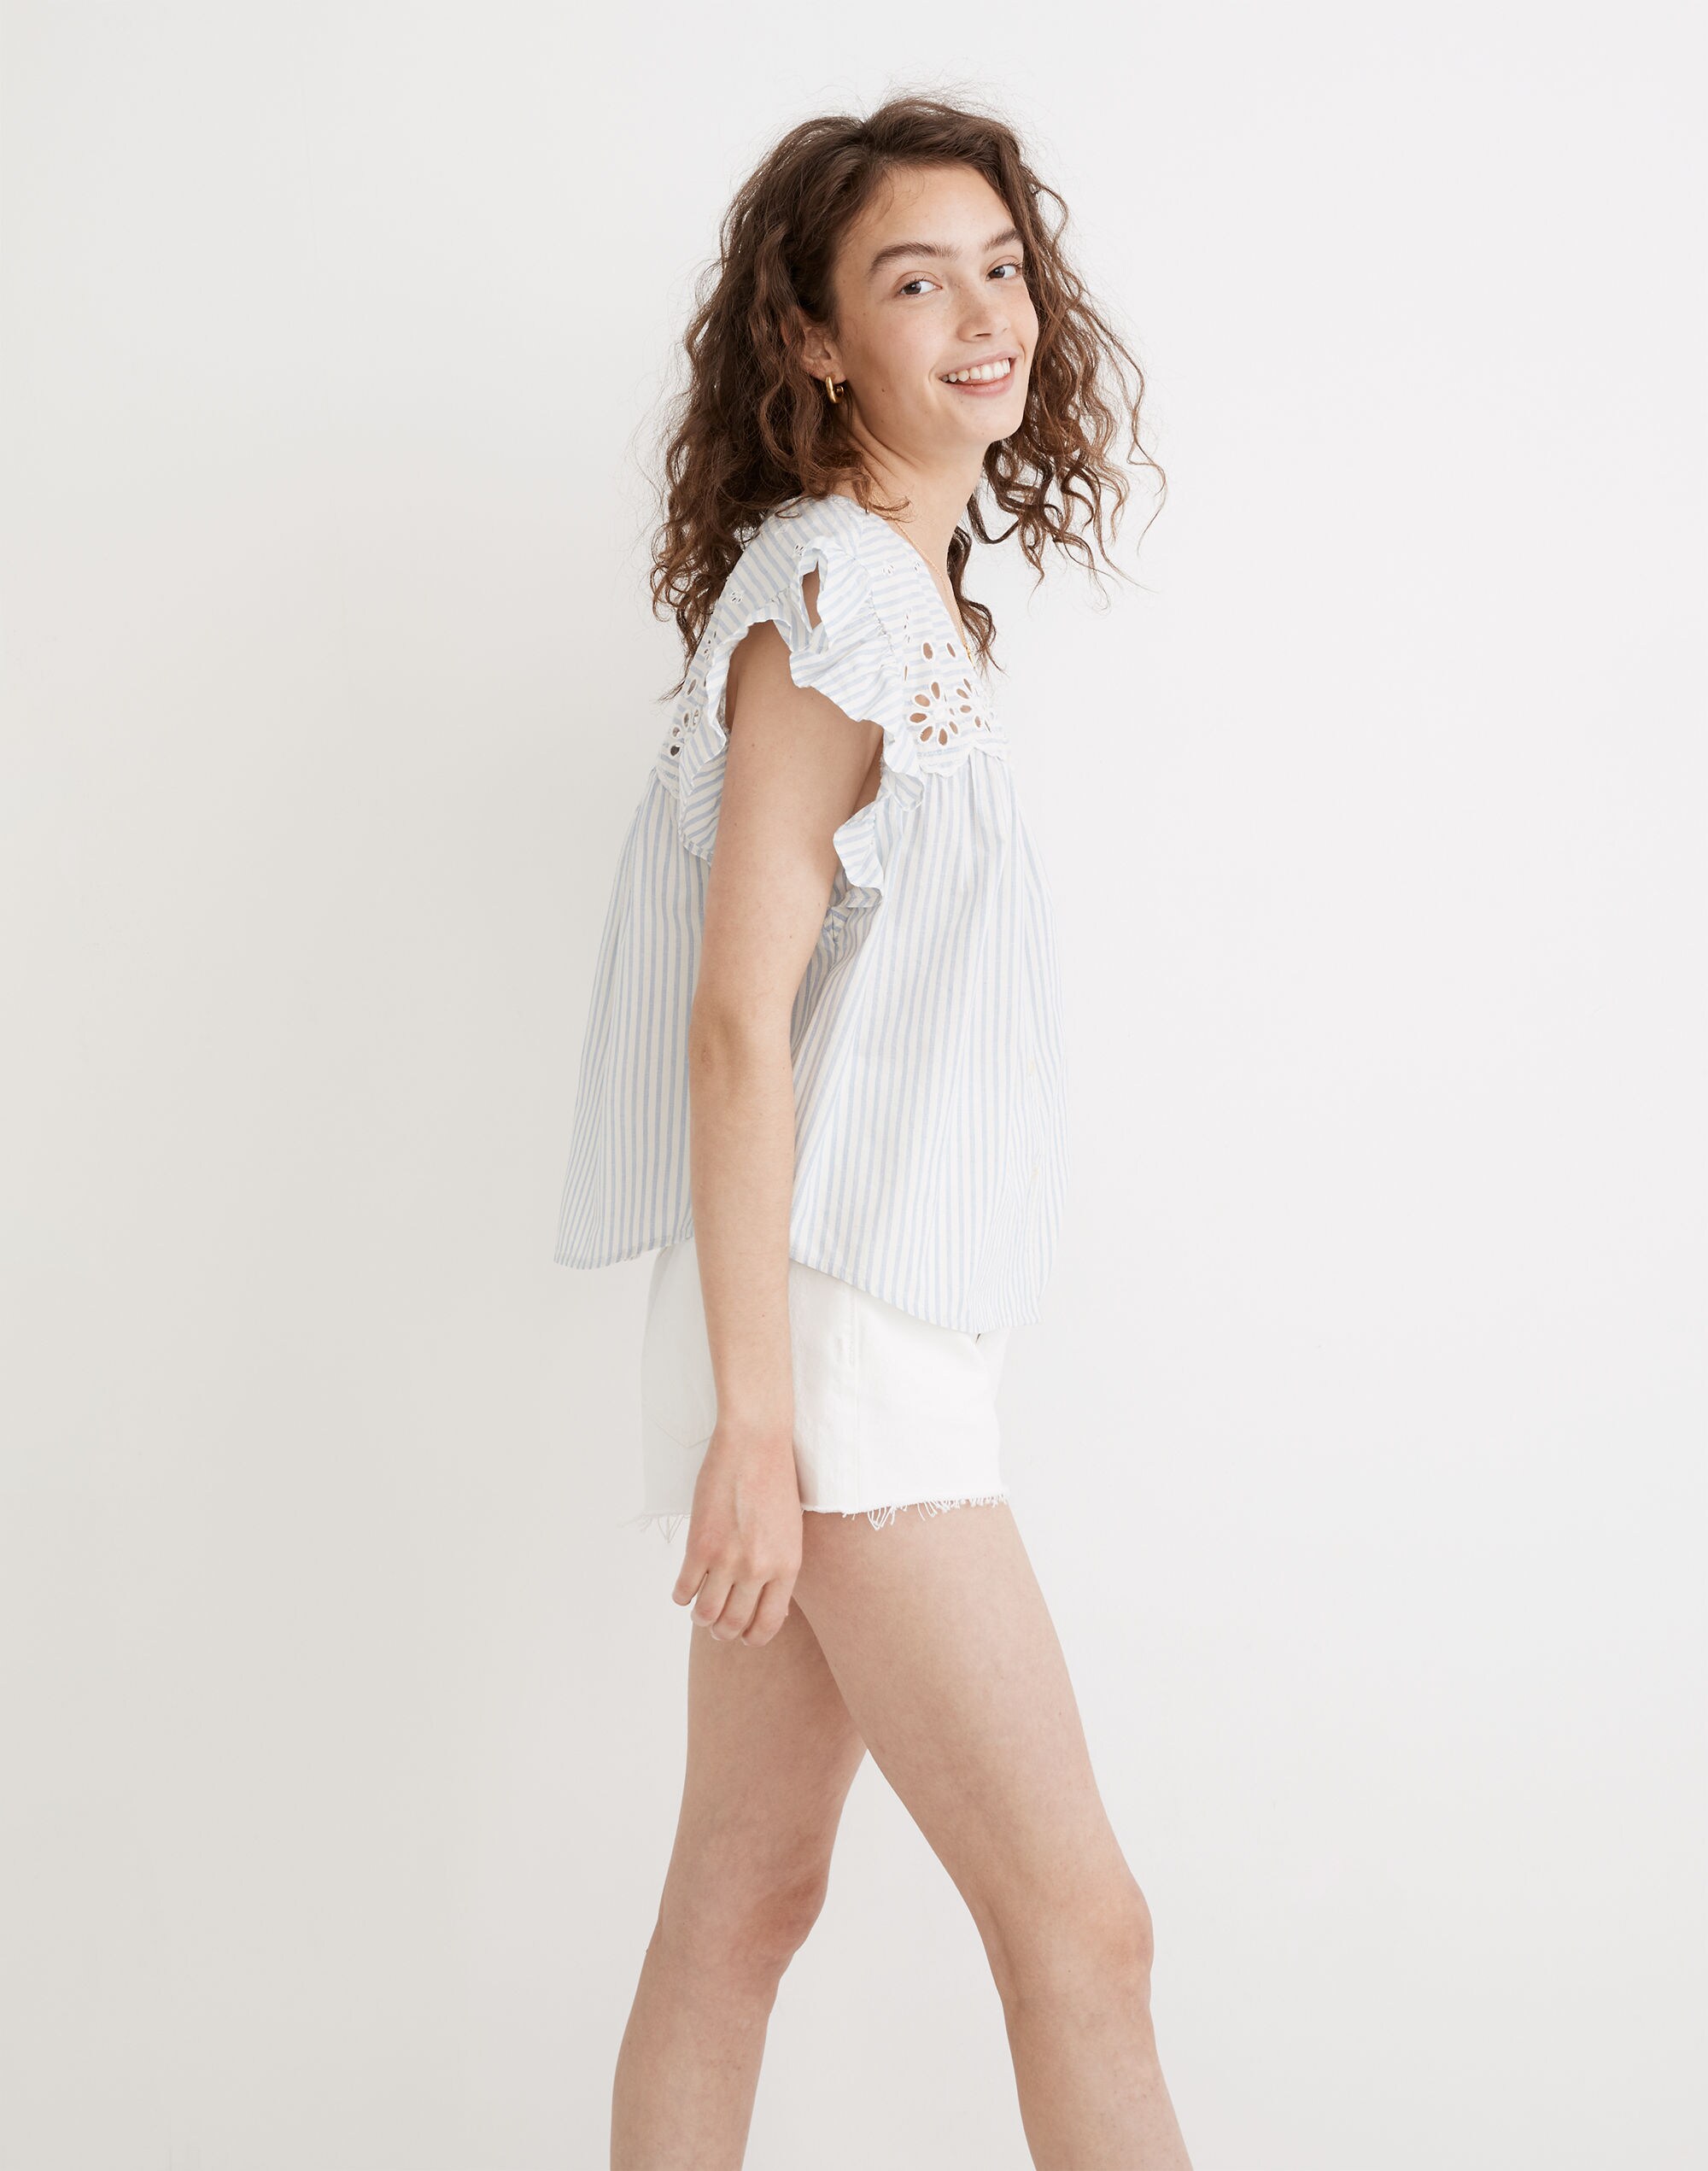 Cotton Button Front Shirt - Swirling Eyelet